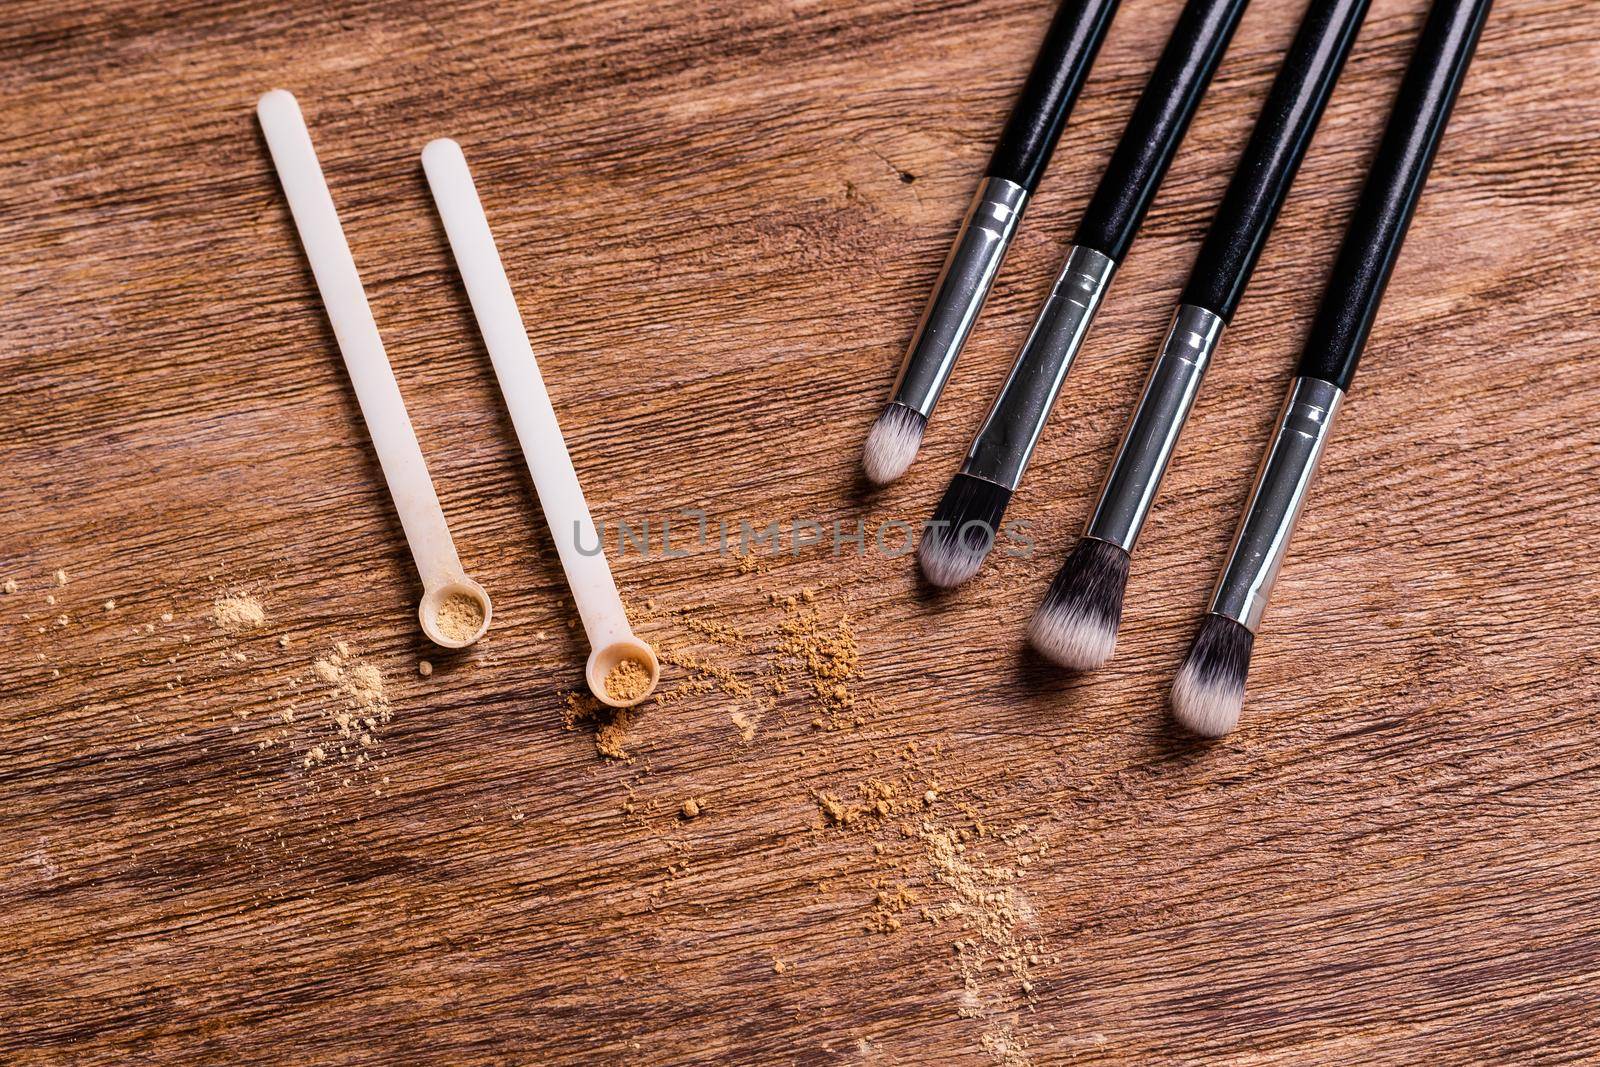 Mineral powder foundation with brushes on a wooden background. Eco-friendly and organic beauty products by Satura86